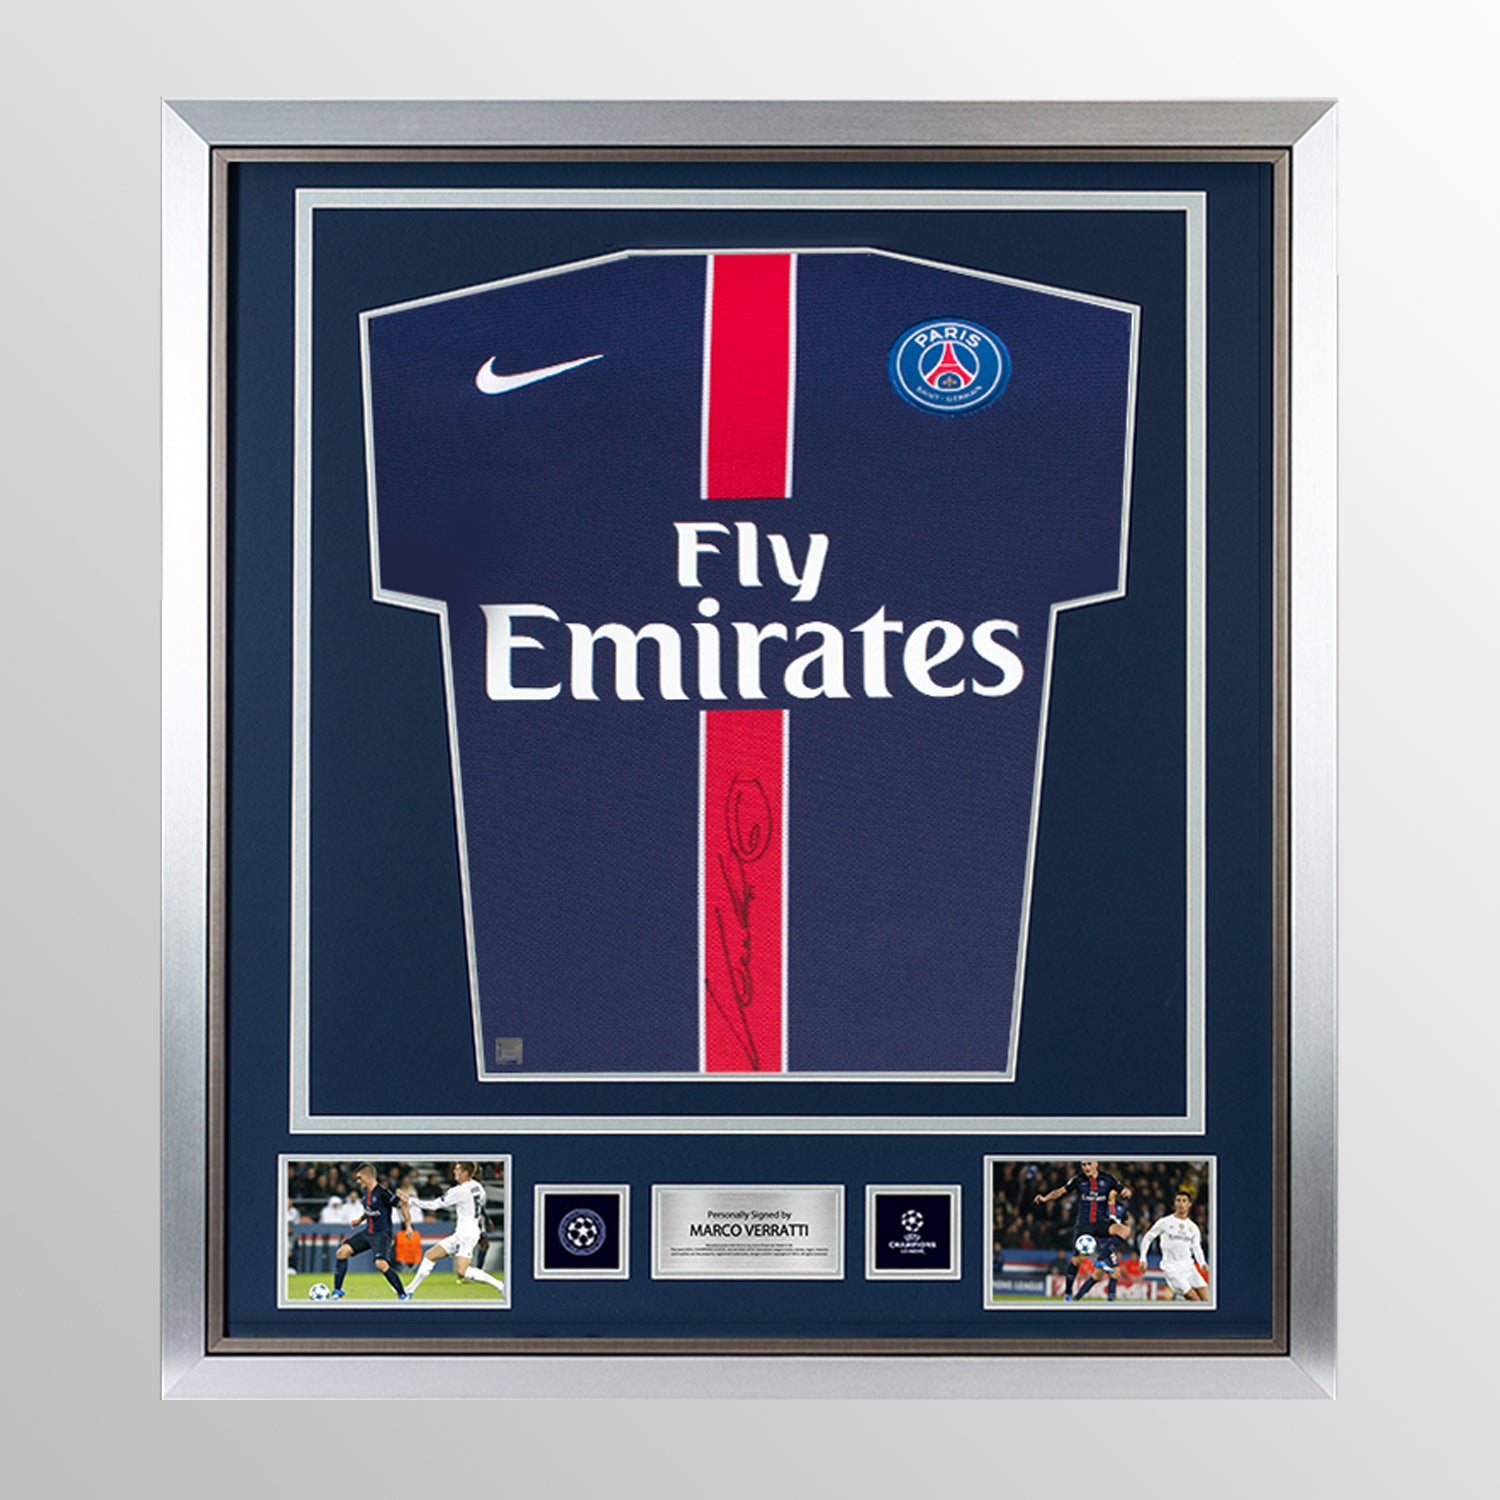 Marco Verratti Official UEFA Champions League Front Signed and Framed Paris Saint-Germain 2015-16 Home Shirt: Signed and Framed In Black UEFA Club Competitions Online Store